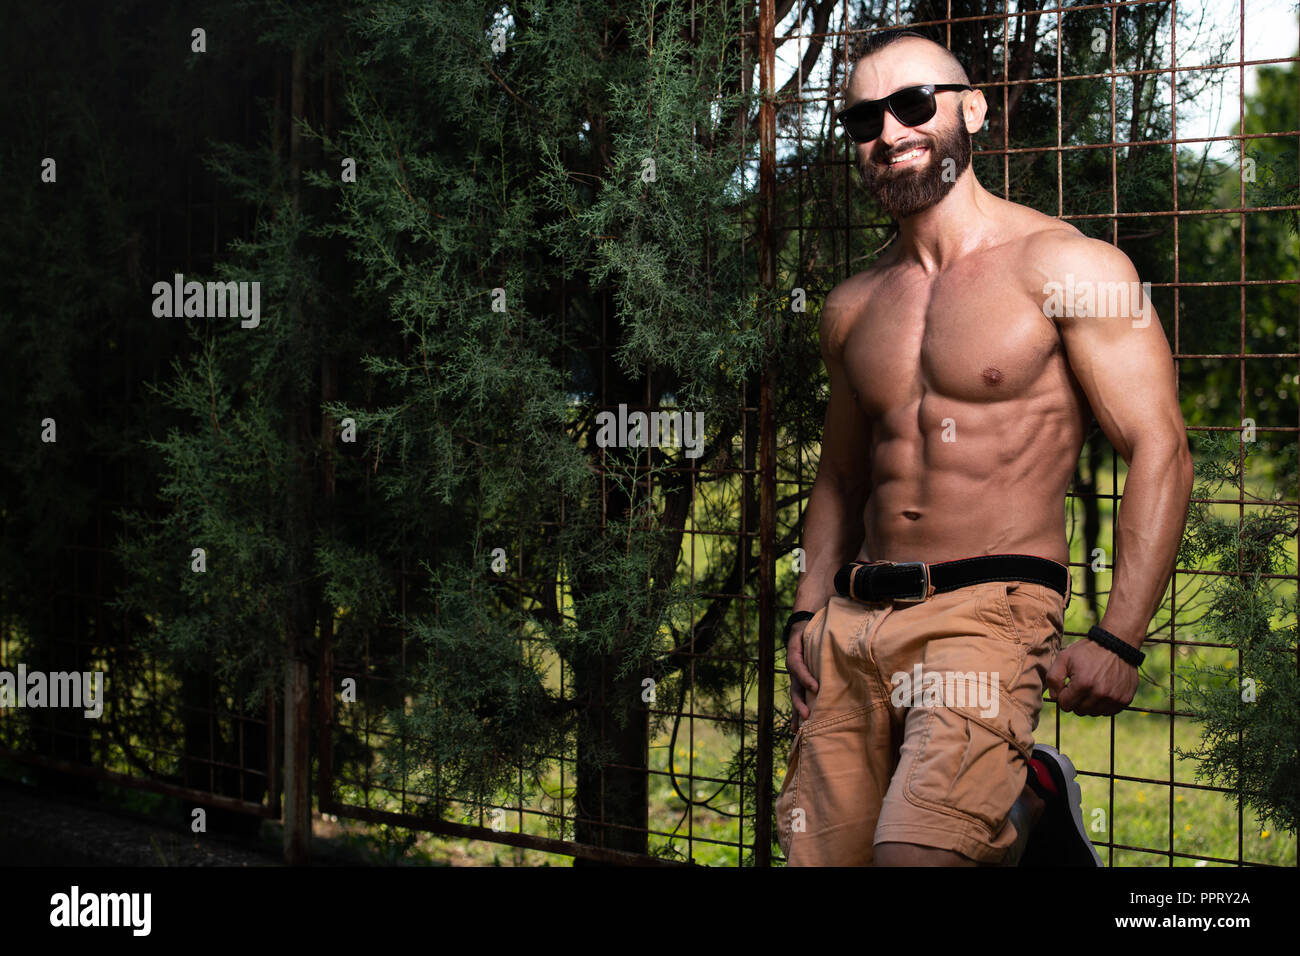 Portrait of a Young Physically Fit Man Showing His Well Trained Body - Muscular Athletic Bodybuilder Fitness Model Posing Outdoors - a Place for Your  Stock Photo